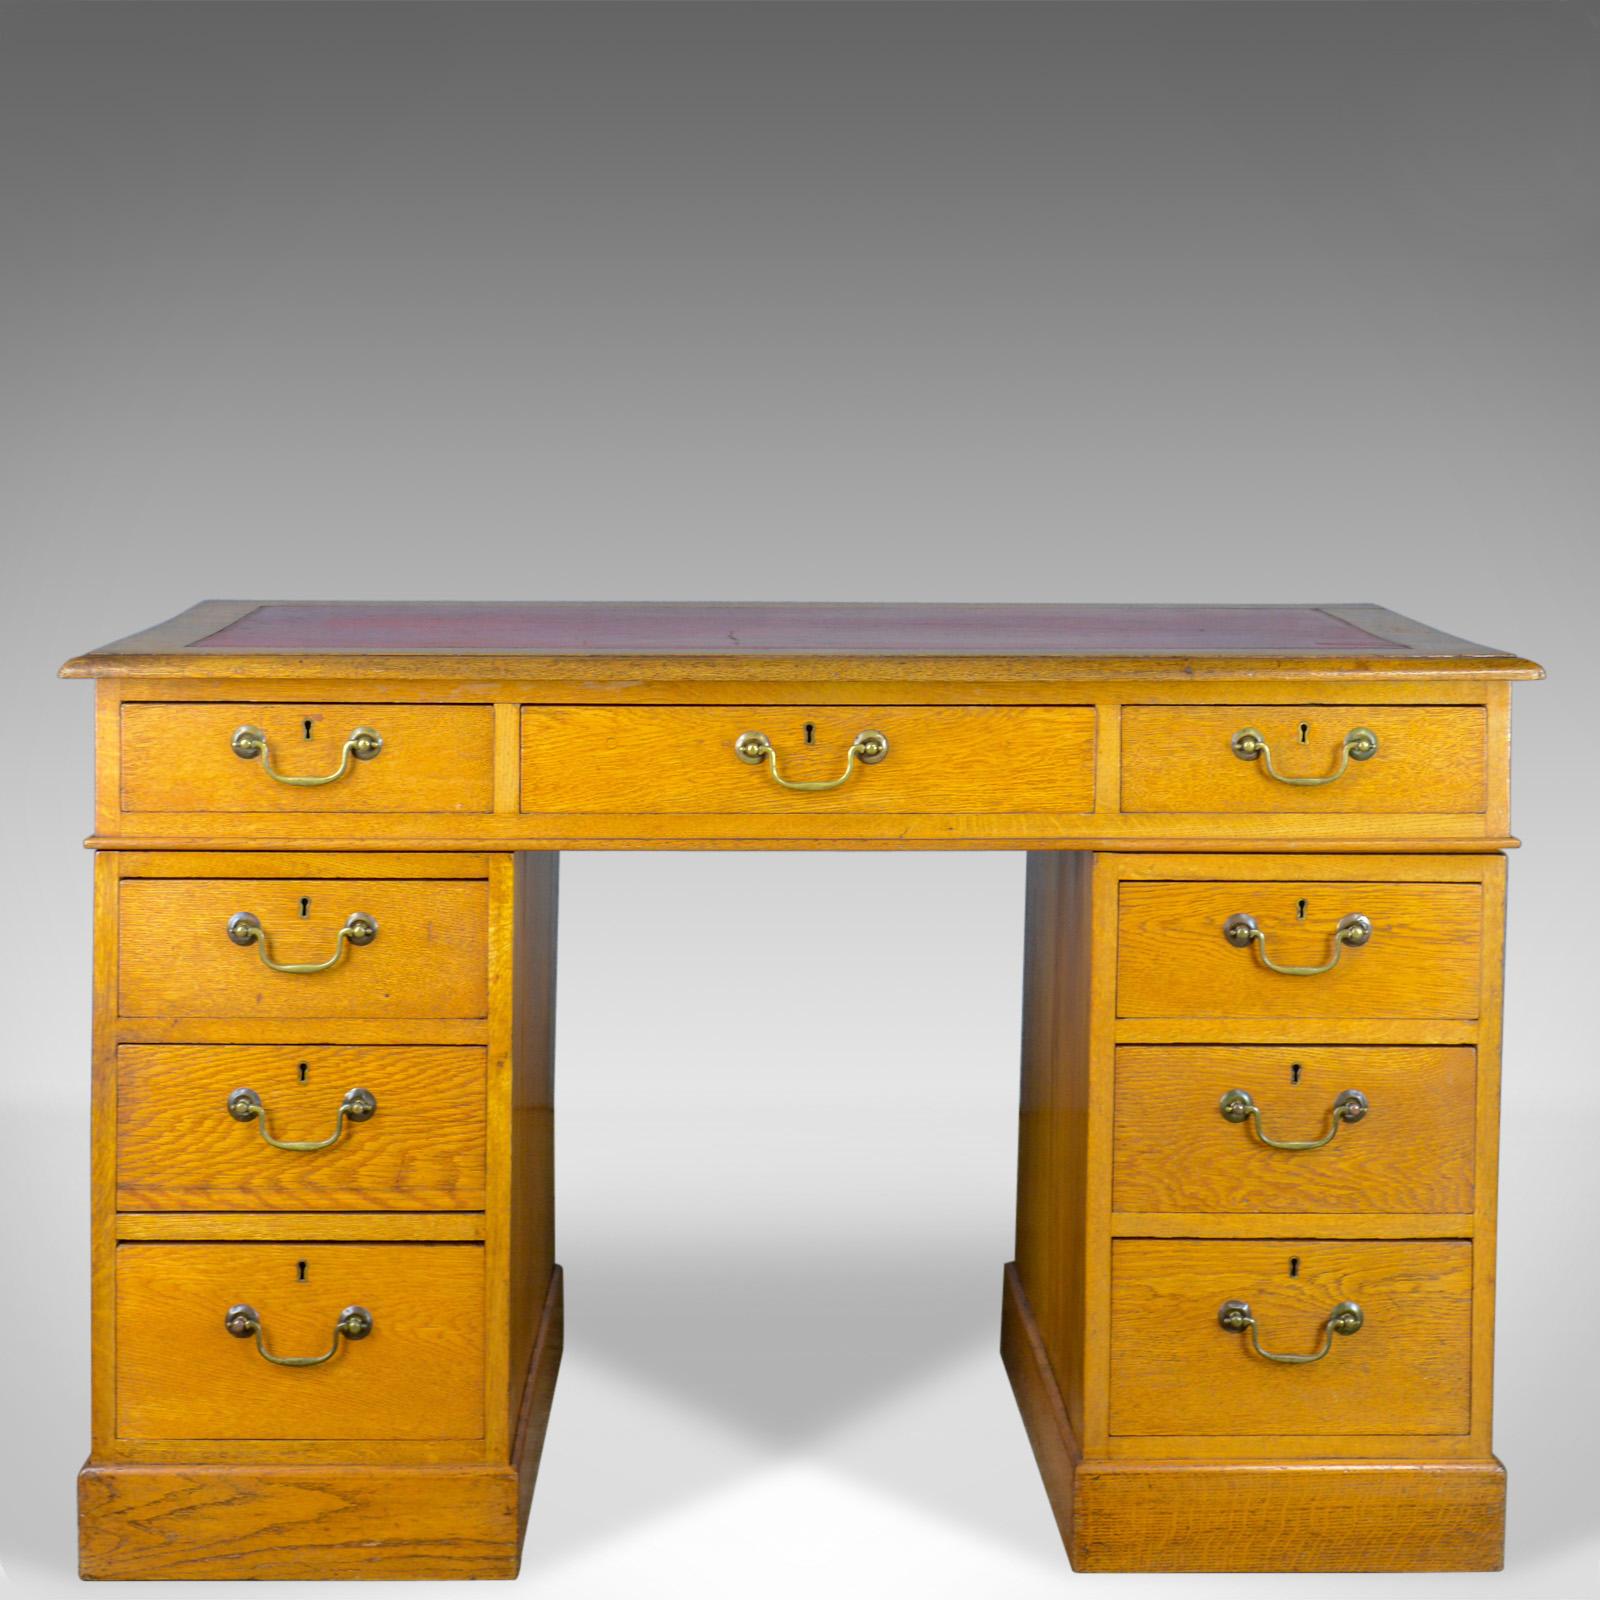 This is an antique pedestal desk, an English, Victorian, golden oak, single desk with leather skiver dating to the late 19th century, circa 1890.

Mid-sized with a 'show back' ideal for centre room placement
The oak in honey hues with good